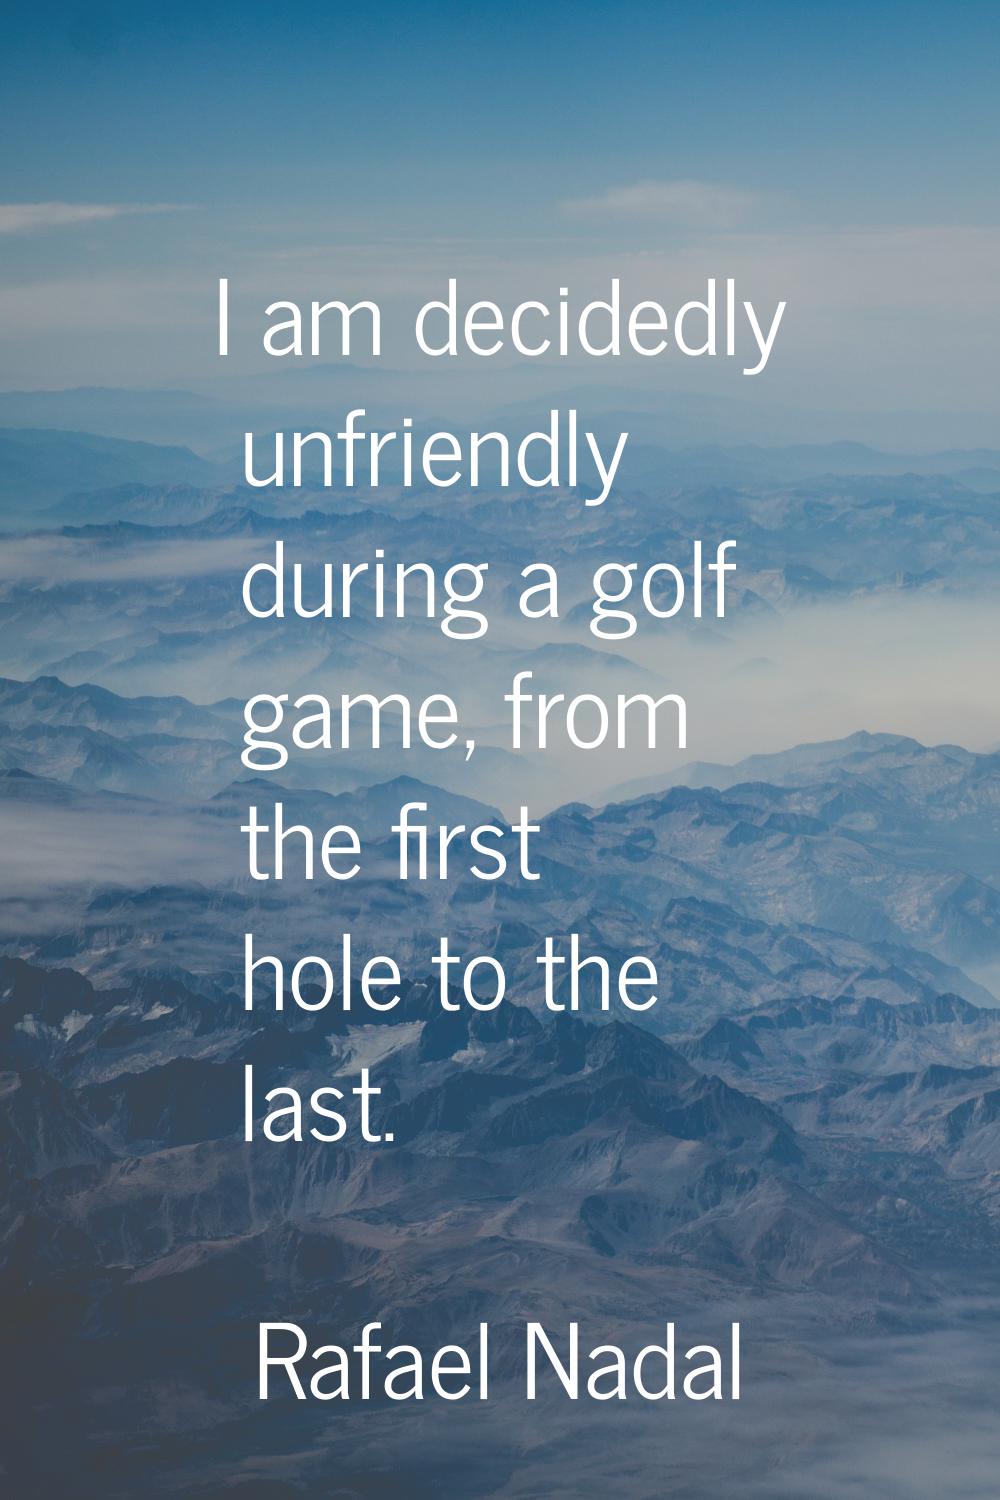 I am decidedly unfriendly during a golf game, from the first hole to the last.